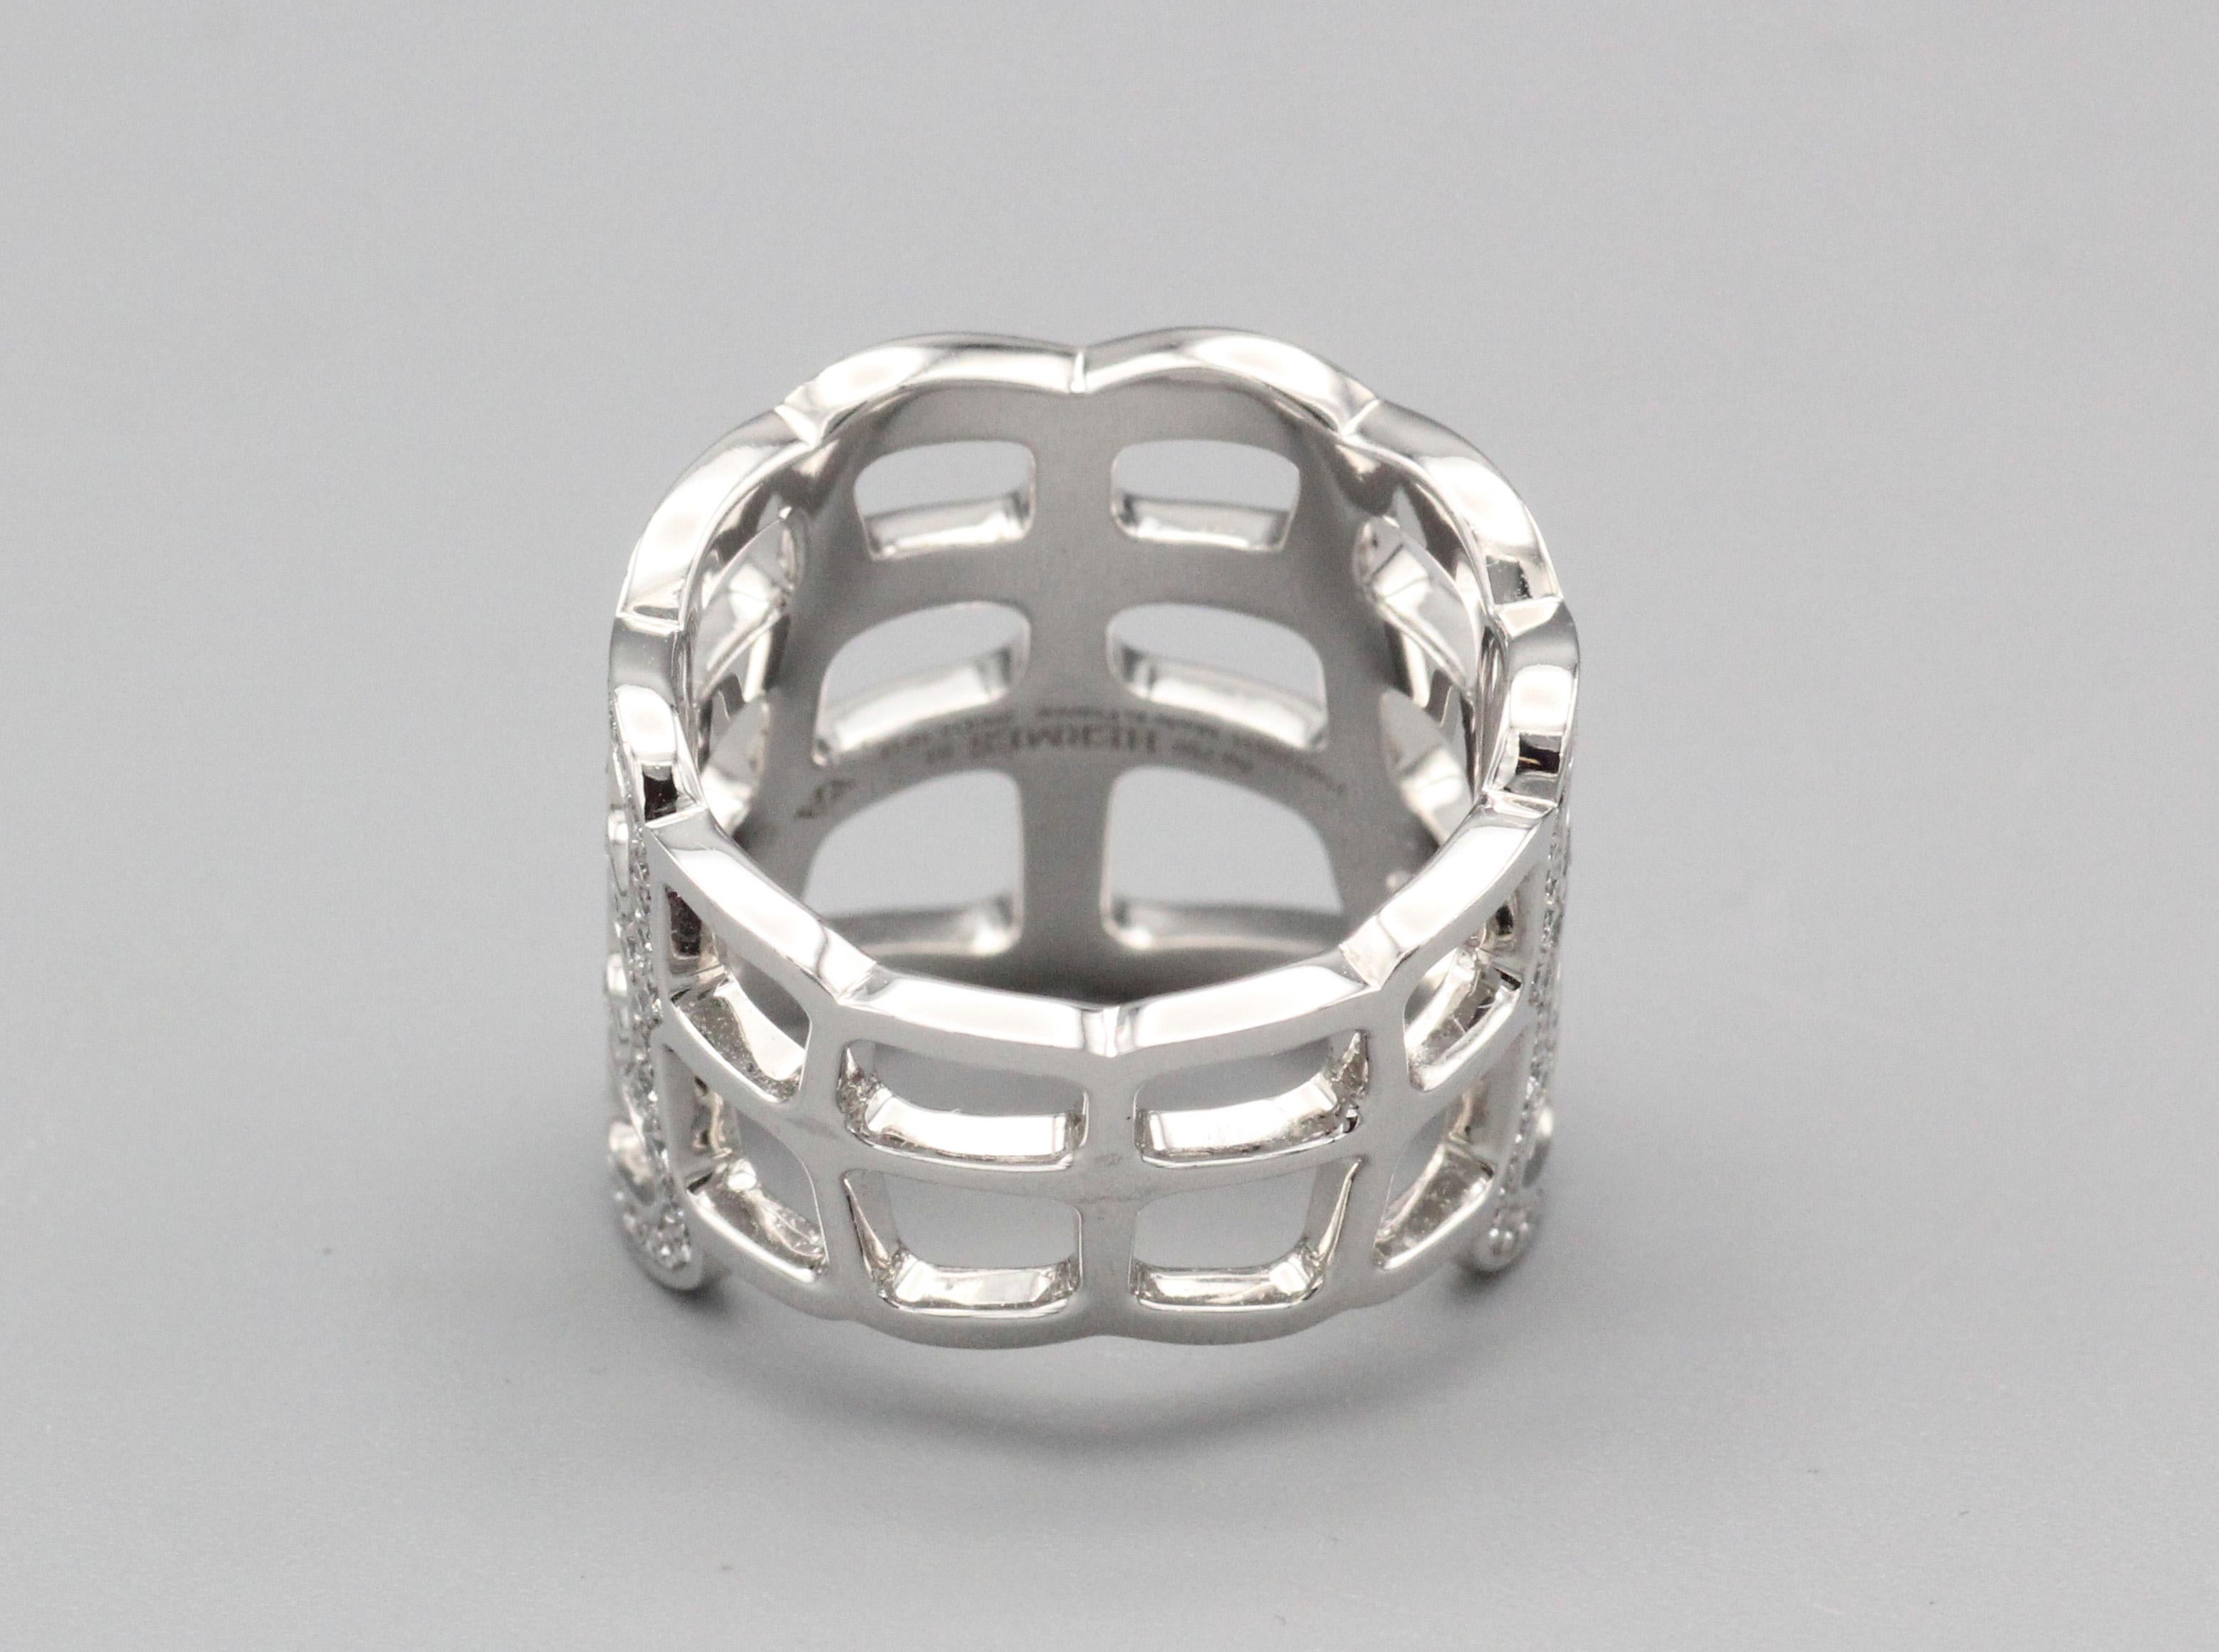 Brilliant Cut Hermes Niloticus Ombre Diamond 18k White Gold Ring Size 6.5 For Sale